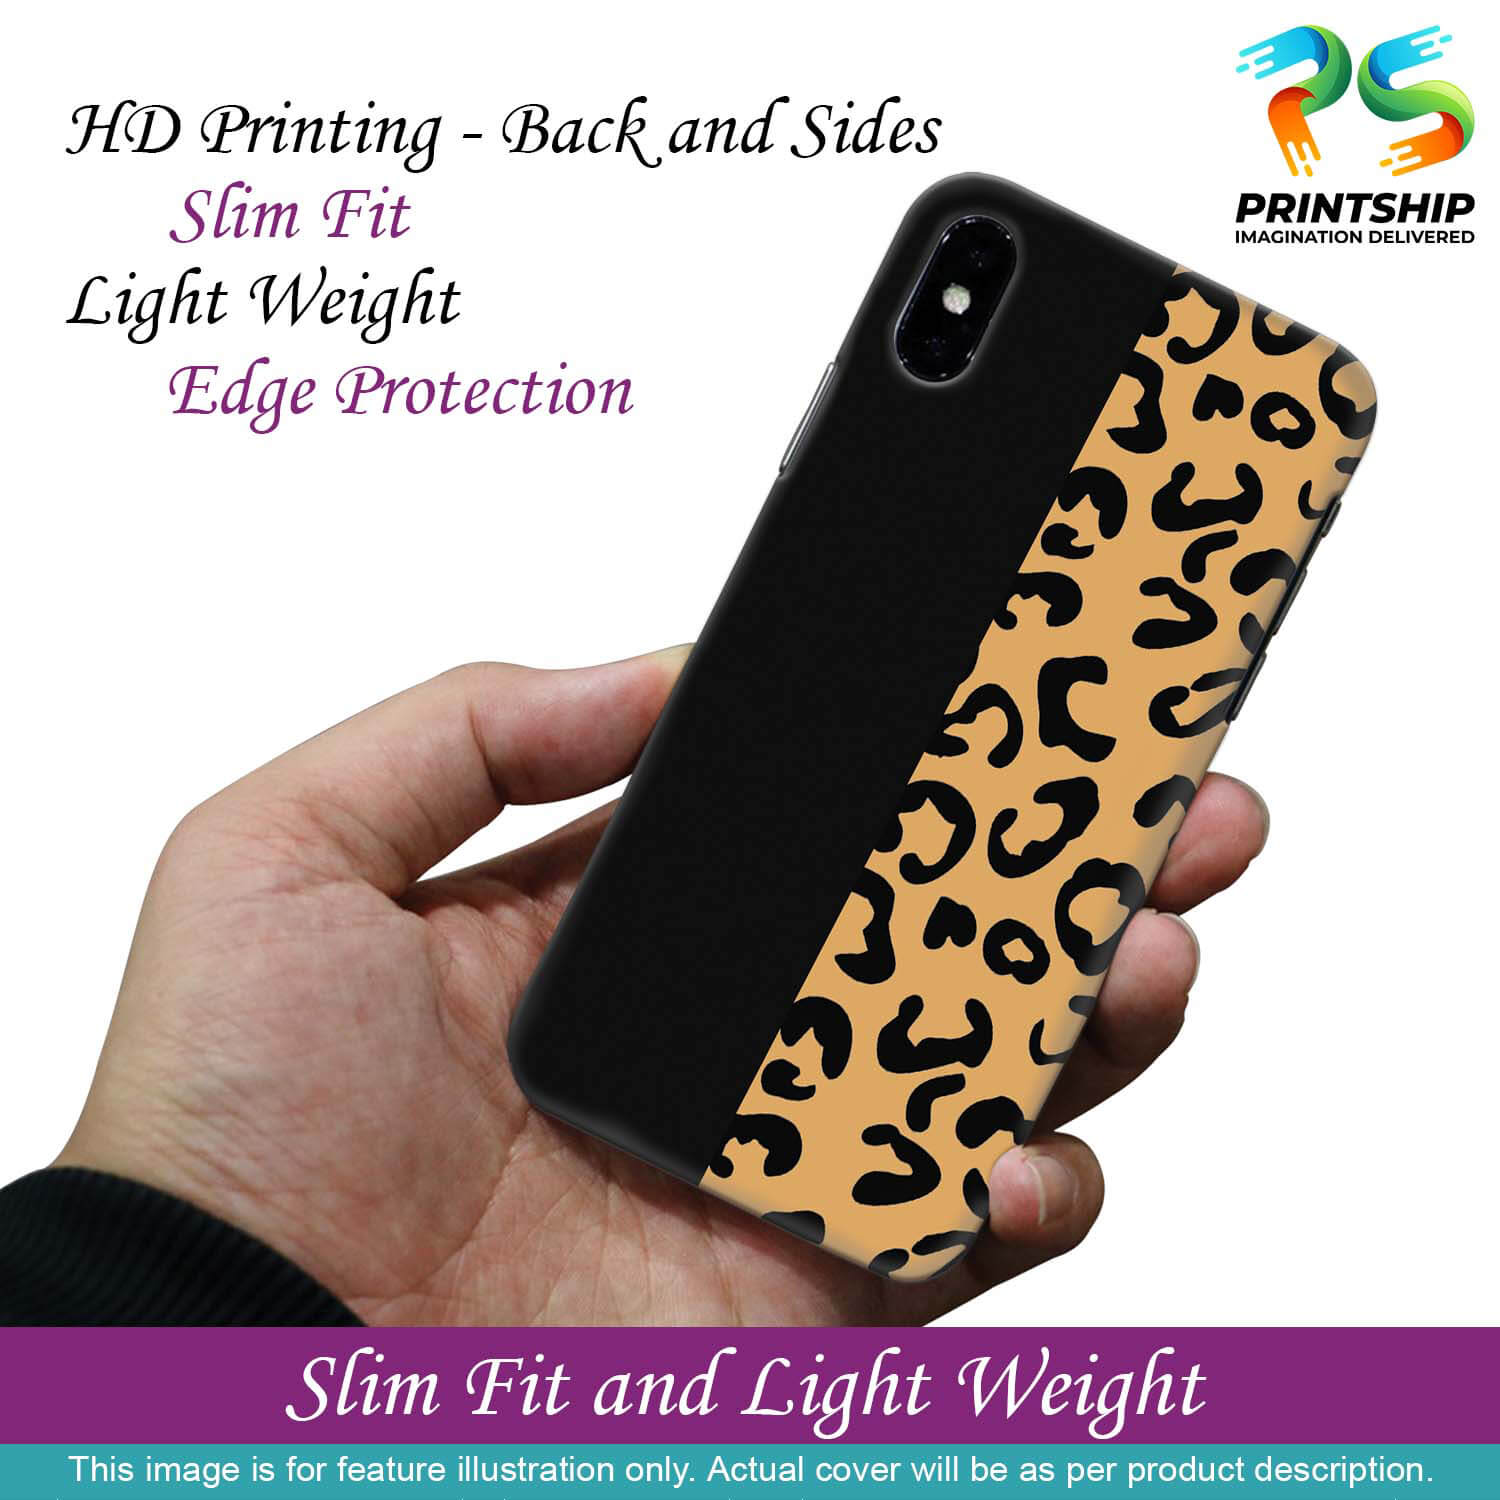 PS1315-Animal Black Pattern Back Cover for Oppo F17